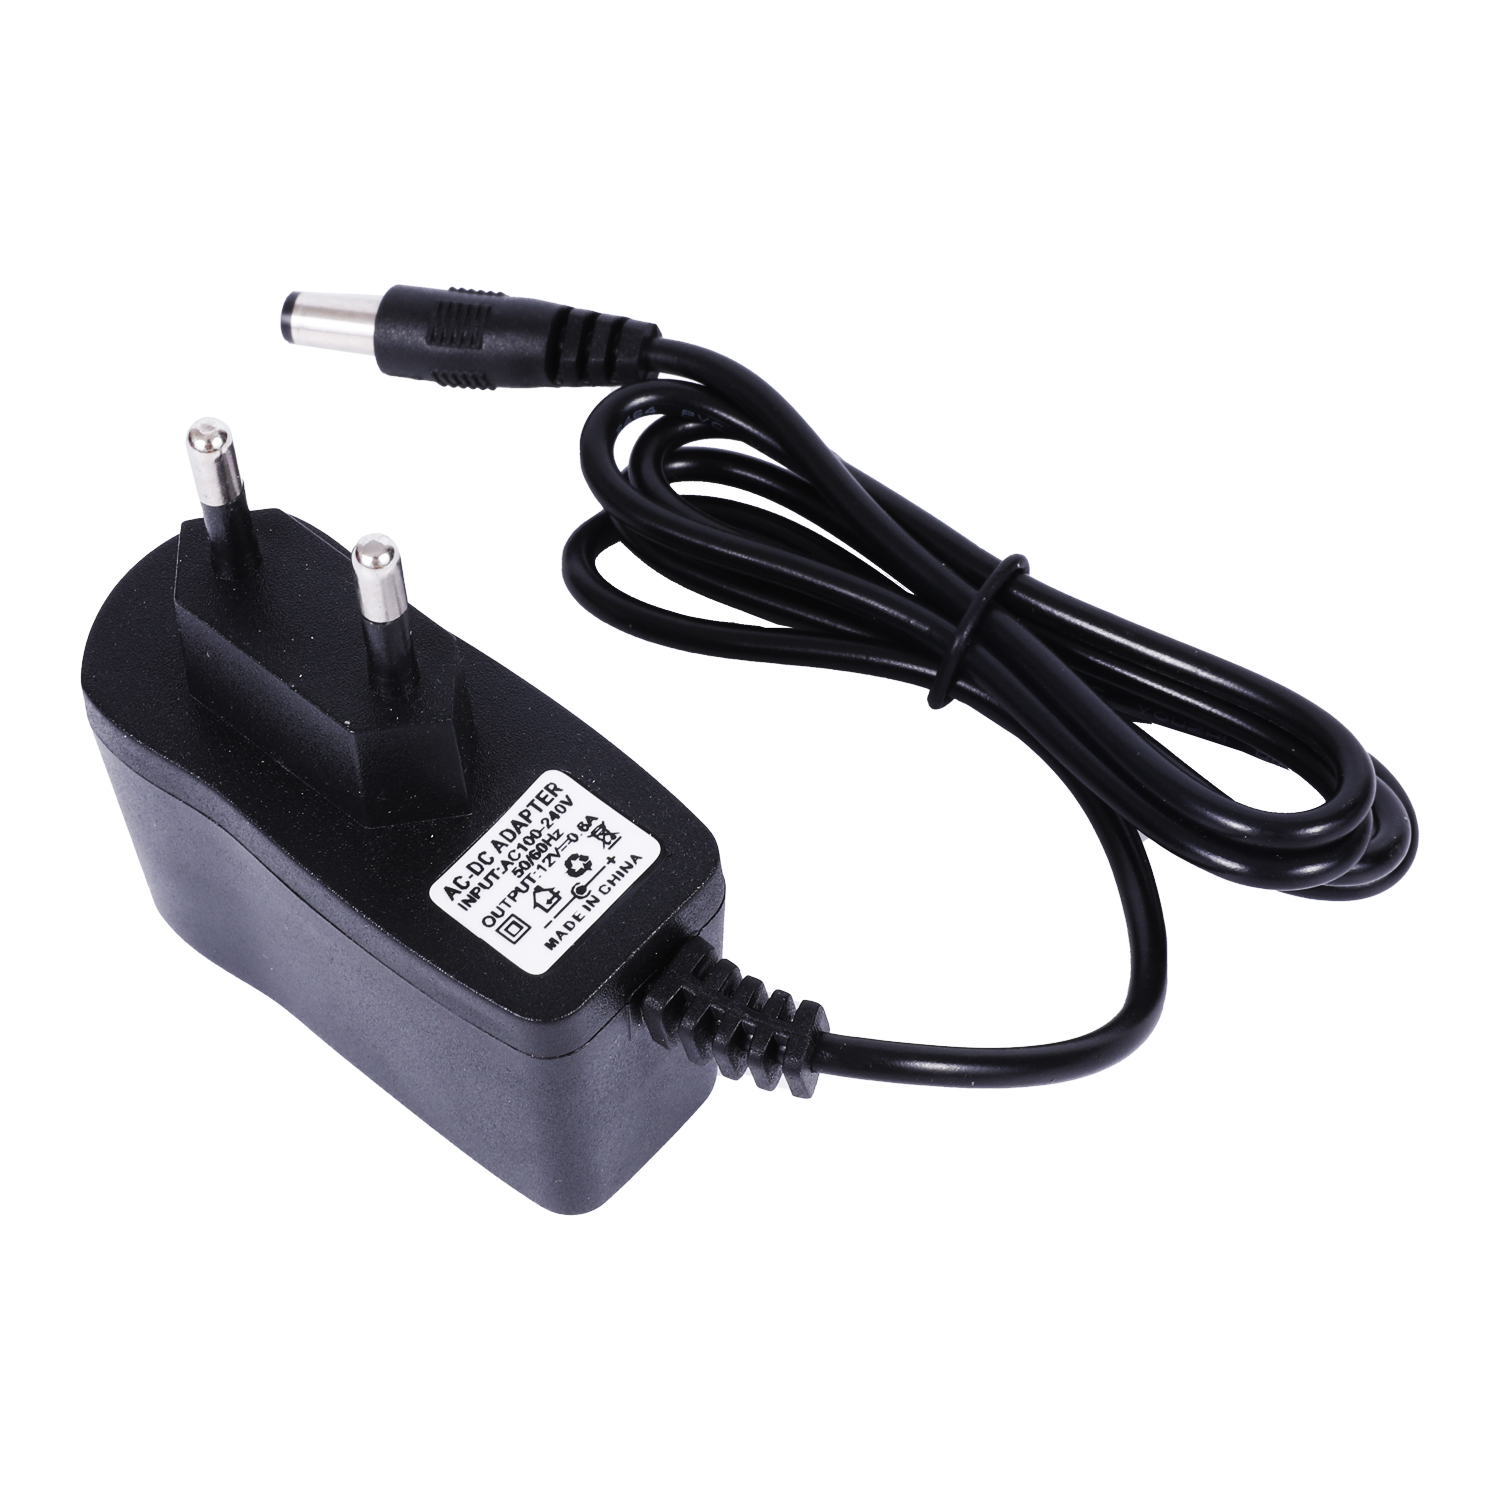 Indoor adapter 50-60hz ac to dc 12V 1A 12W charger adaptery